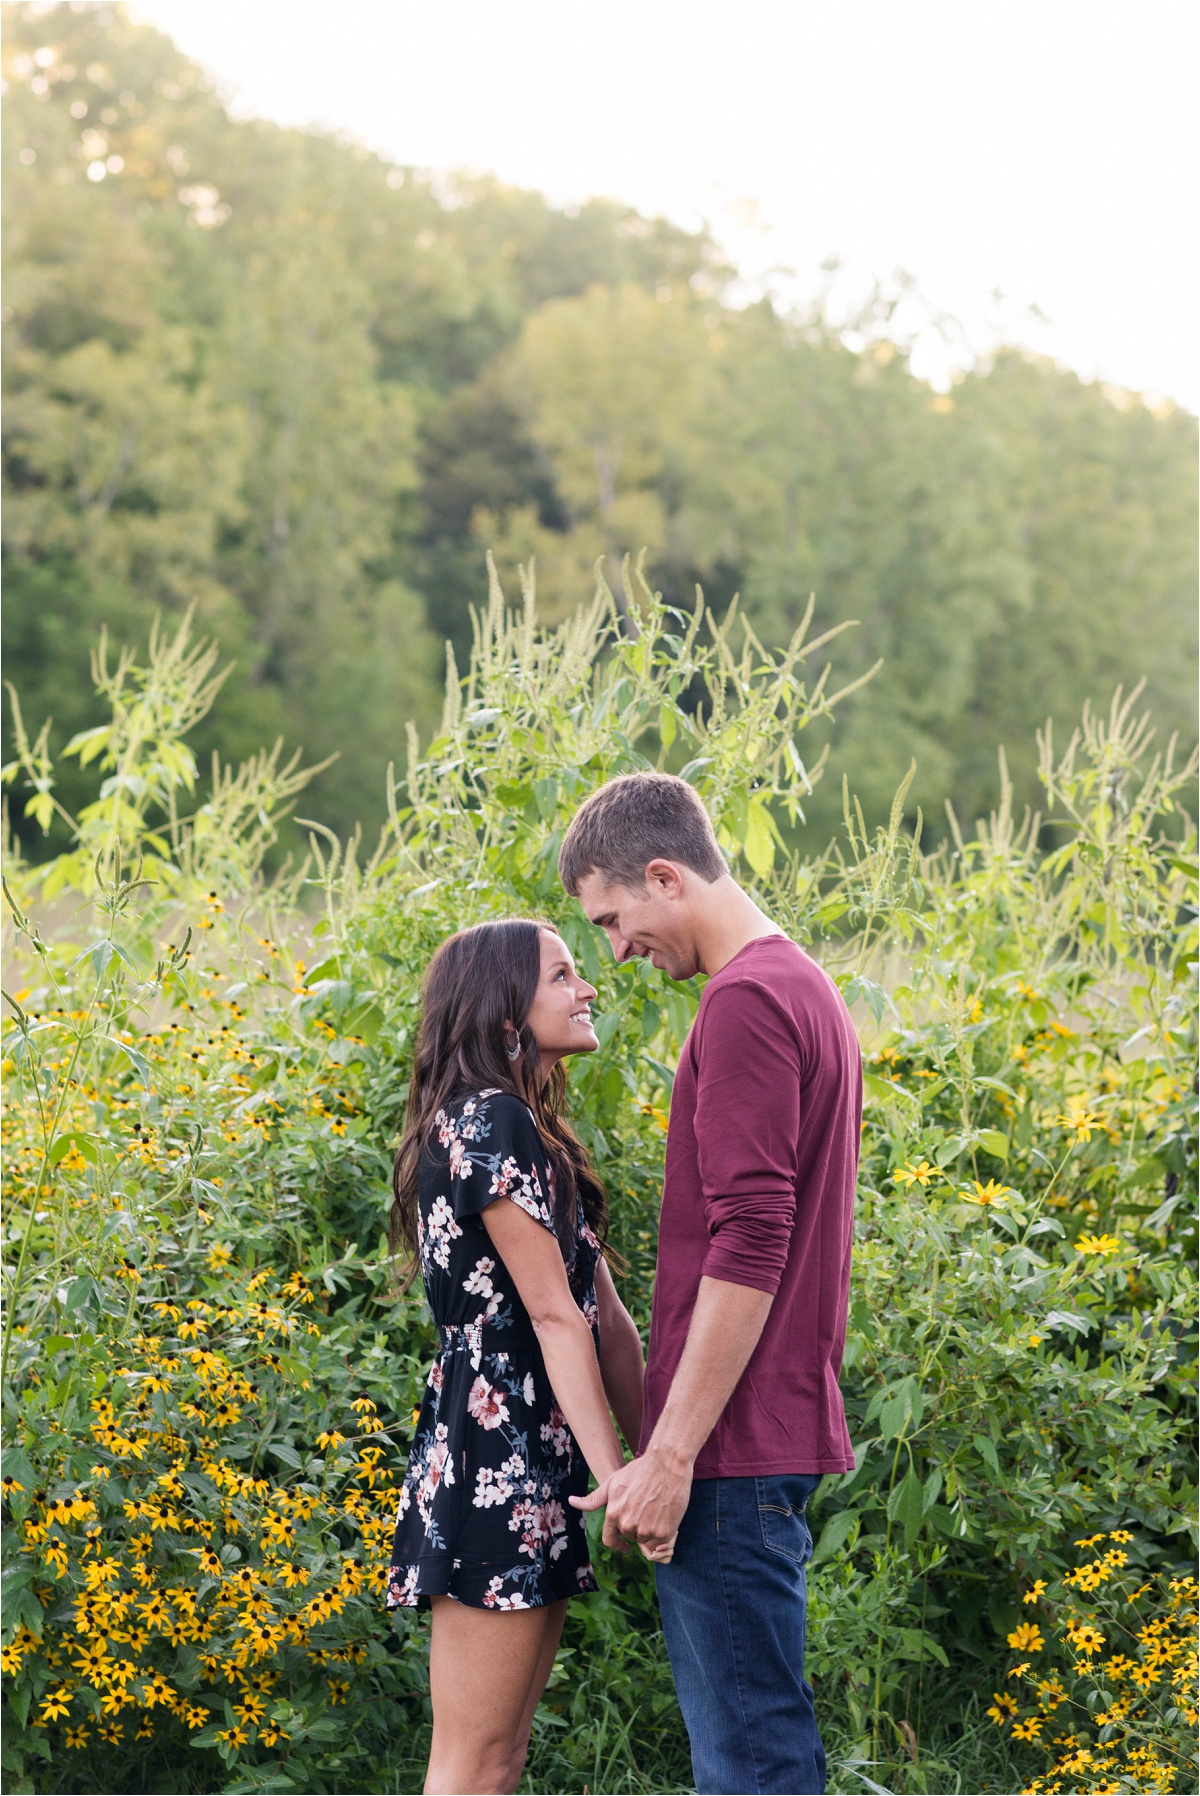 mines of spain engagement dubuque